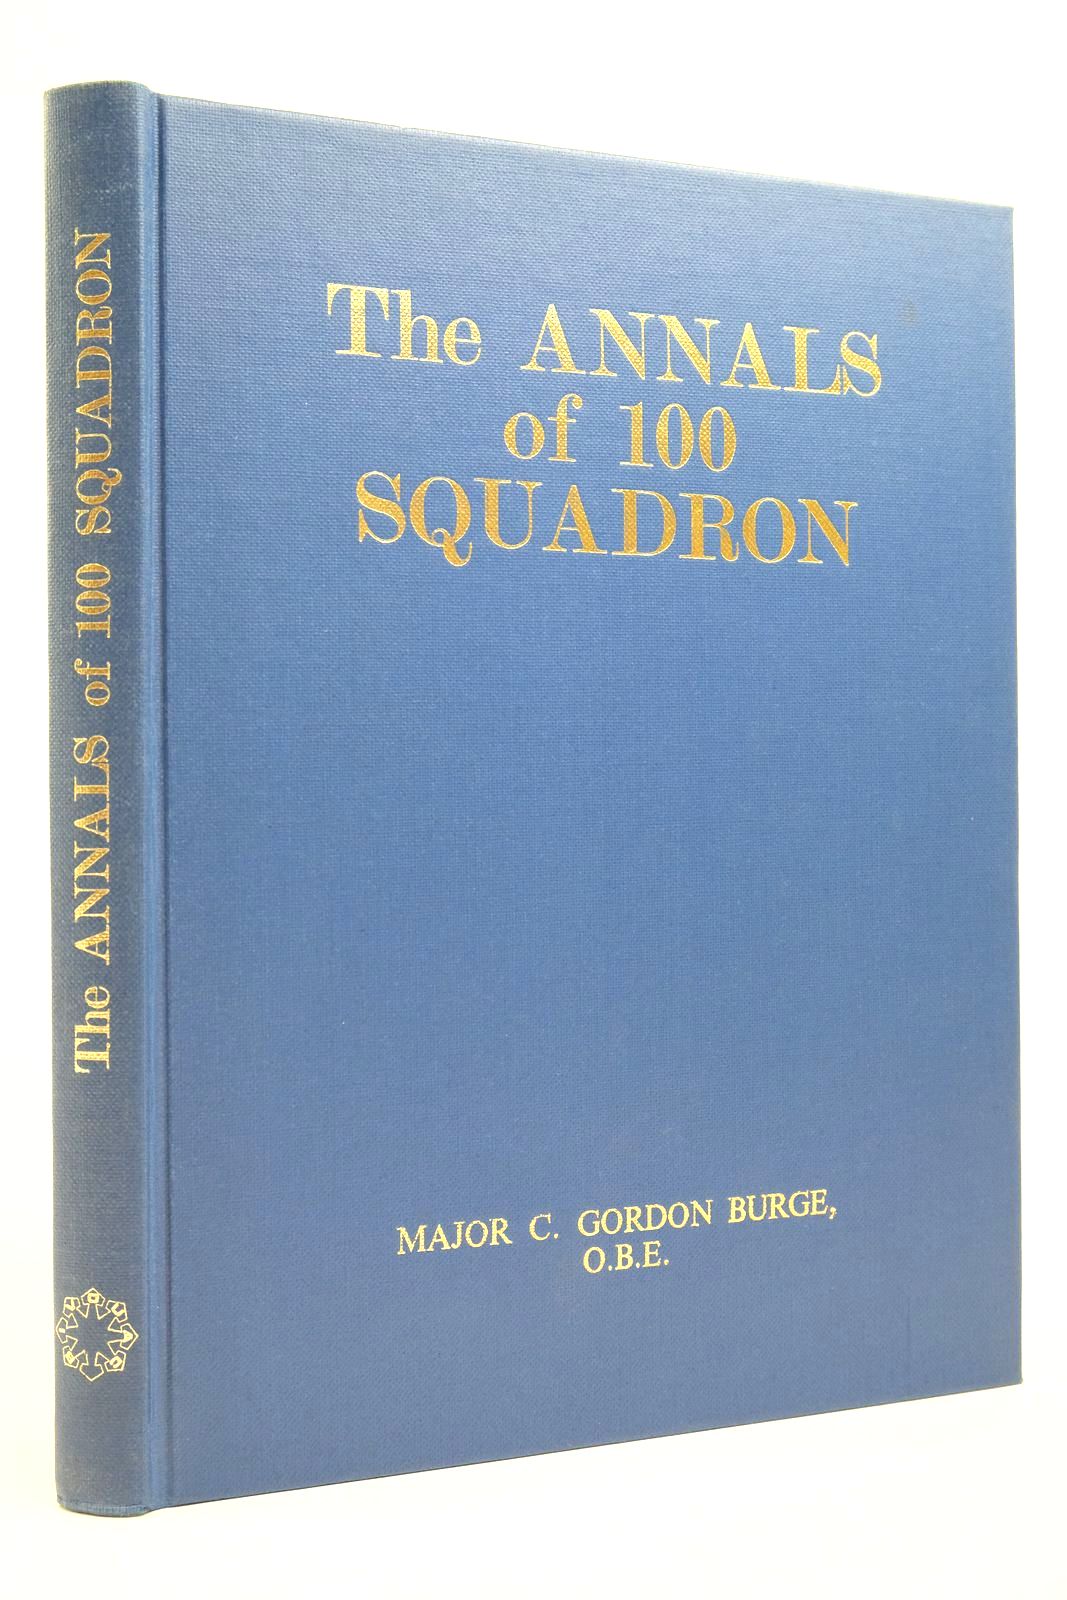 Photo of THE ANNALS OF 100 SQUADRON- Stock Number: 2139948